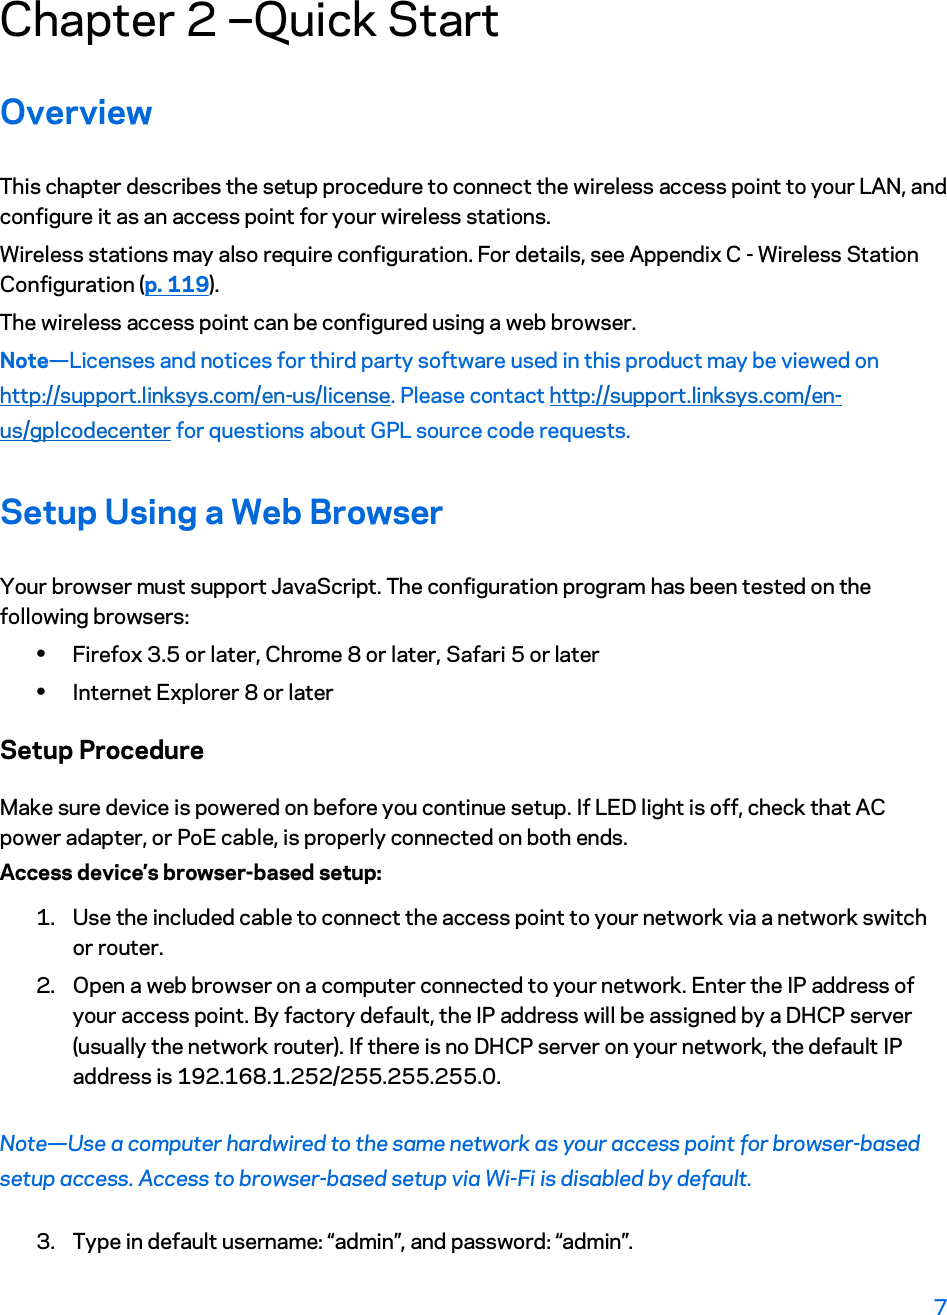 Chapter 2 ---Quick Start Overview This chapter describes the setup procedure to connect the wireless access point to your LAN, and configure it as an access point for your wireless stations. Wireless stations may also require configuration. For details, see Appendix C - Wireless Station Configuration (p. 119).  The wireless access point can be configured using a web browser. Note—Licenses and notices for third party software used in this product may be viewed on http://support.linksys.com/en-us/license. Please contact http://support.linksys.com/en-us/gplcodecenter for questions about GPL source code requests.  Setup Using a Web Browser Your browser must support JavaScript. The configuration program has been tested on the following browsers: xFirefox 3.5 or later, Chrome 8 or later, Safari 5 or later xInternet Explorer 8 or later Setup Procedure Make sure device is powered on before you continue setup. If LED light is off, check that AC power adapter, or PoE cable, is properly connected on both ends.  Access device’s browser-based setup: 1. Use the included cable to connect the access point to your network via a network switch or router. 2. Open a web browser on a computer connected to your network. Enter the IP address of your access point. By factory default, the IP address will be assigned by a DHCP server (usually the network router). If there is no DHCP server on your network, the default IP address is 192.168.1.252/255.255.255.0. Note—Use a computer hardwired to the same network as your access point for browser-based setup access. Access to browser-based setup via Wi-Fi is disabled by default. 3. Type in default username: “admin”, and password: “admin”. 7 